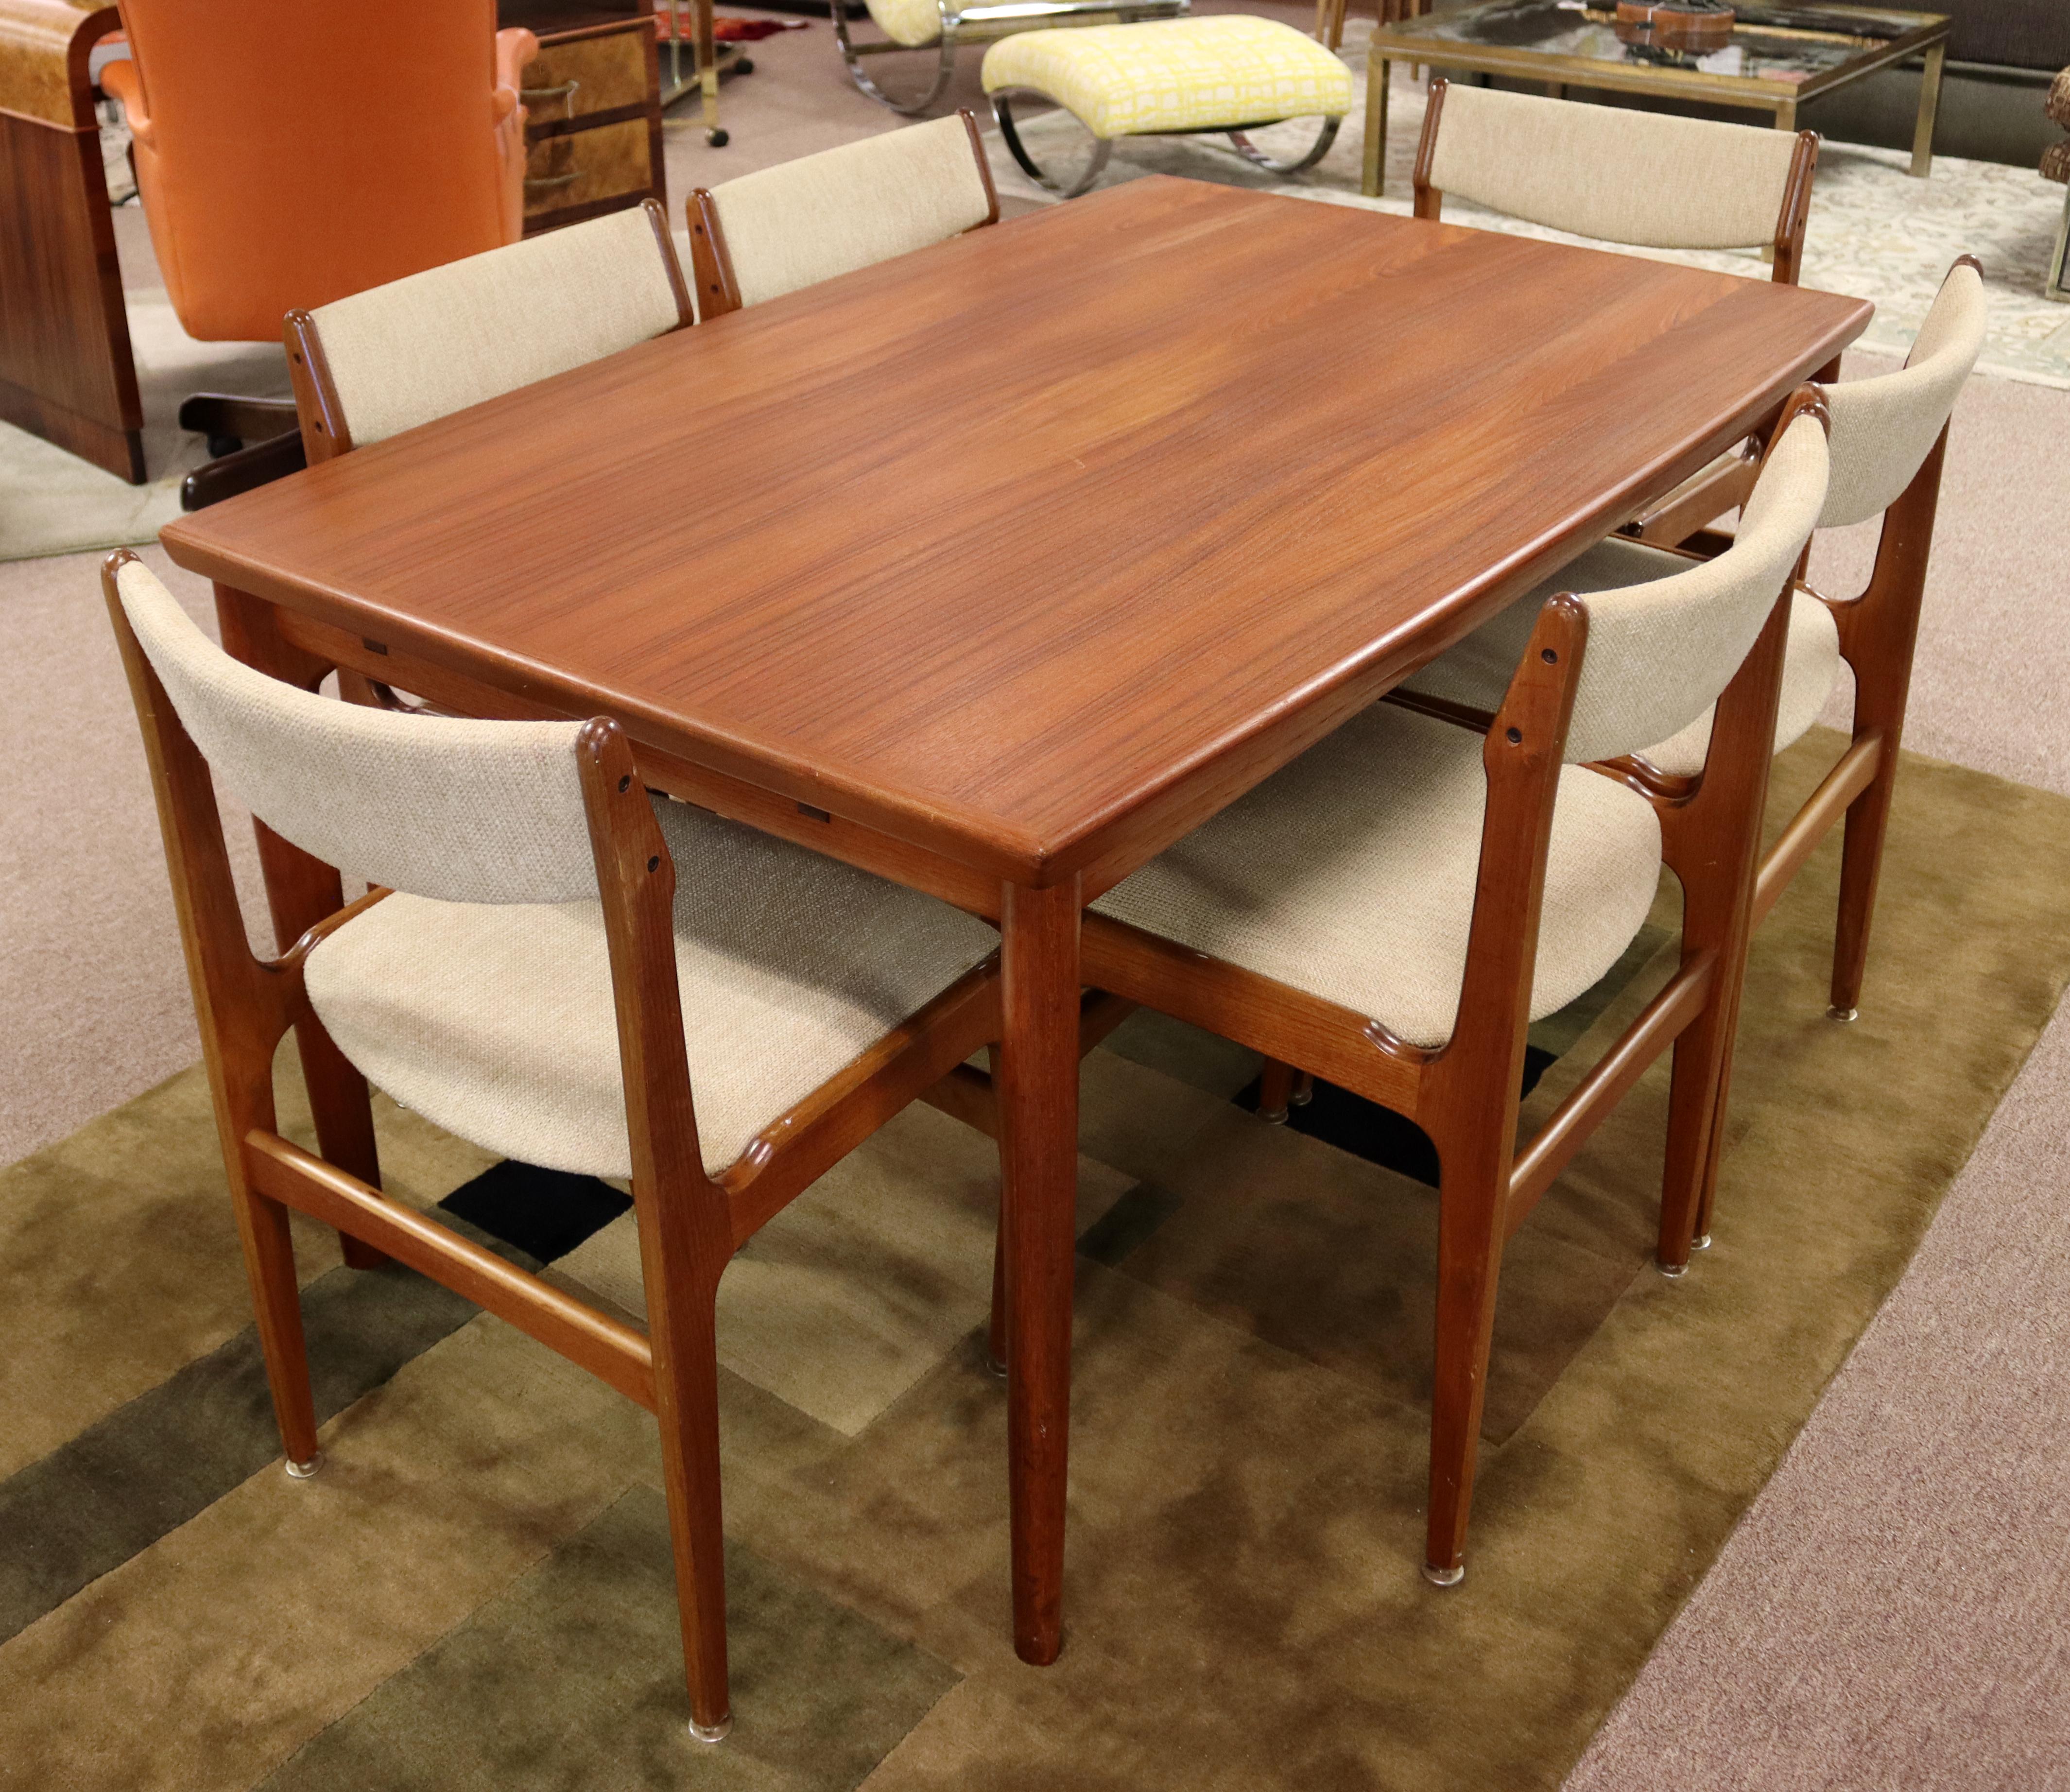 For your consideration is an outstanding, teak dining set, including six side chairs and extendable table, by Grete Jalk, made in Denmark, circa the 1960s. In very good vintage condition. The dimensions of the table are 55